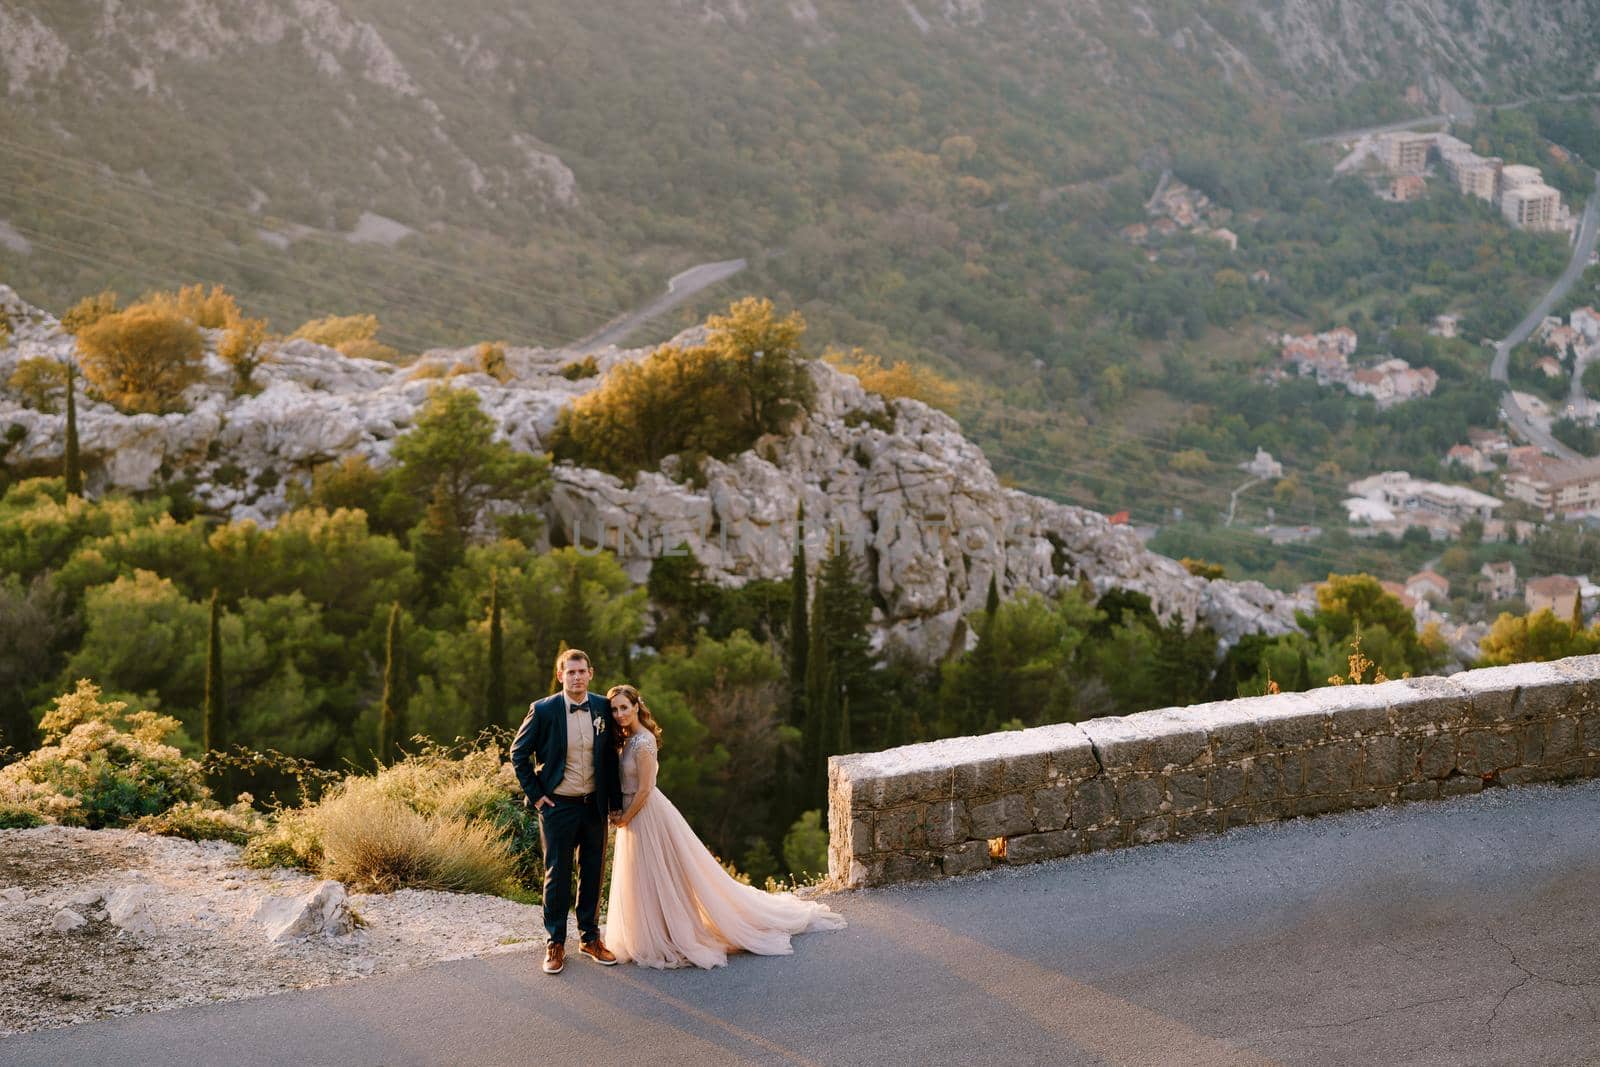 Groom and bride stand embracing on the road in the mountains. High quality photo